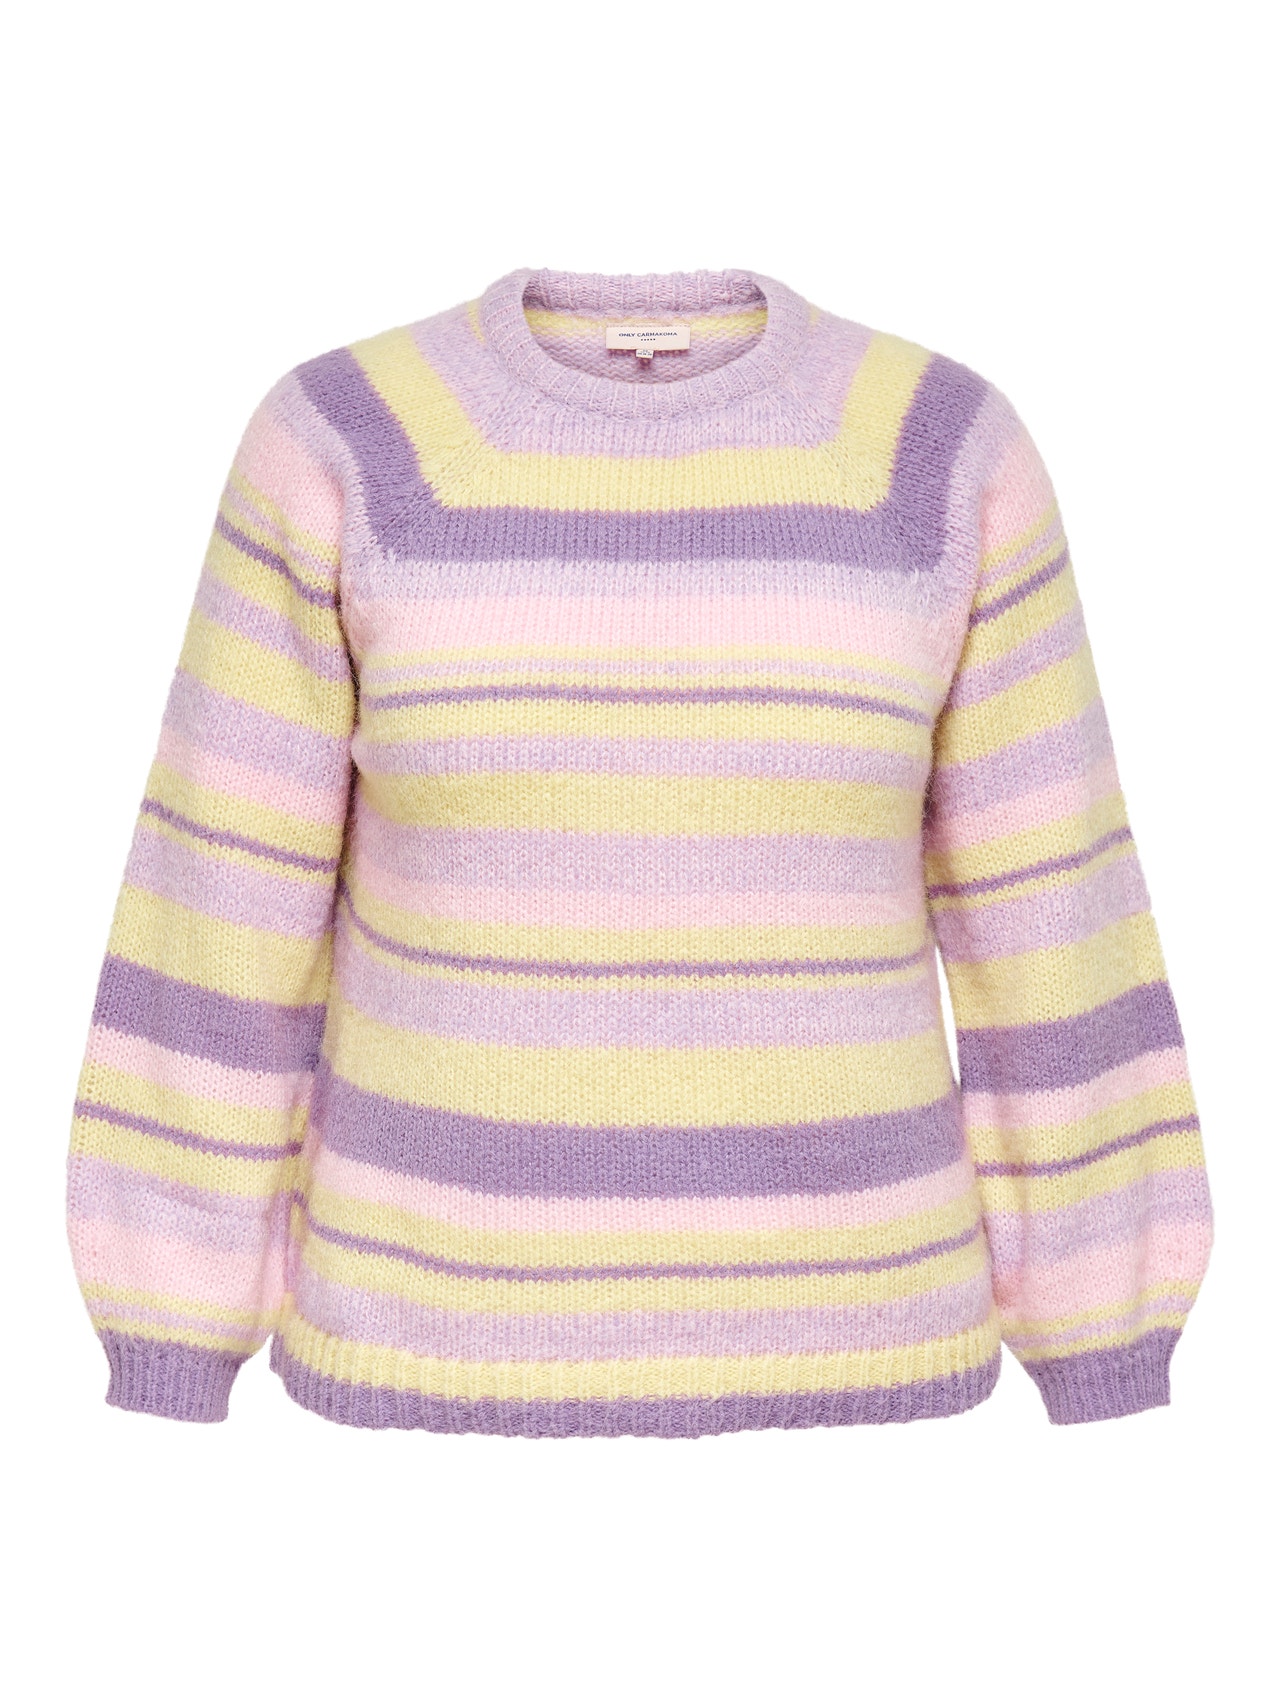 ONLY O-hals Pullover -Lavendula - 15263830